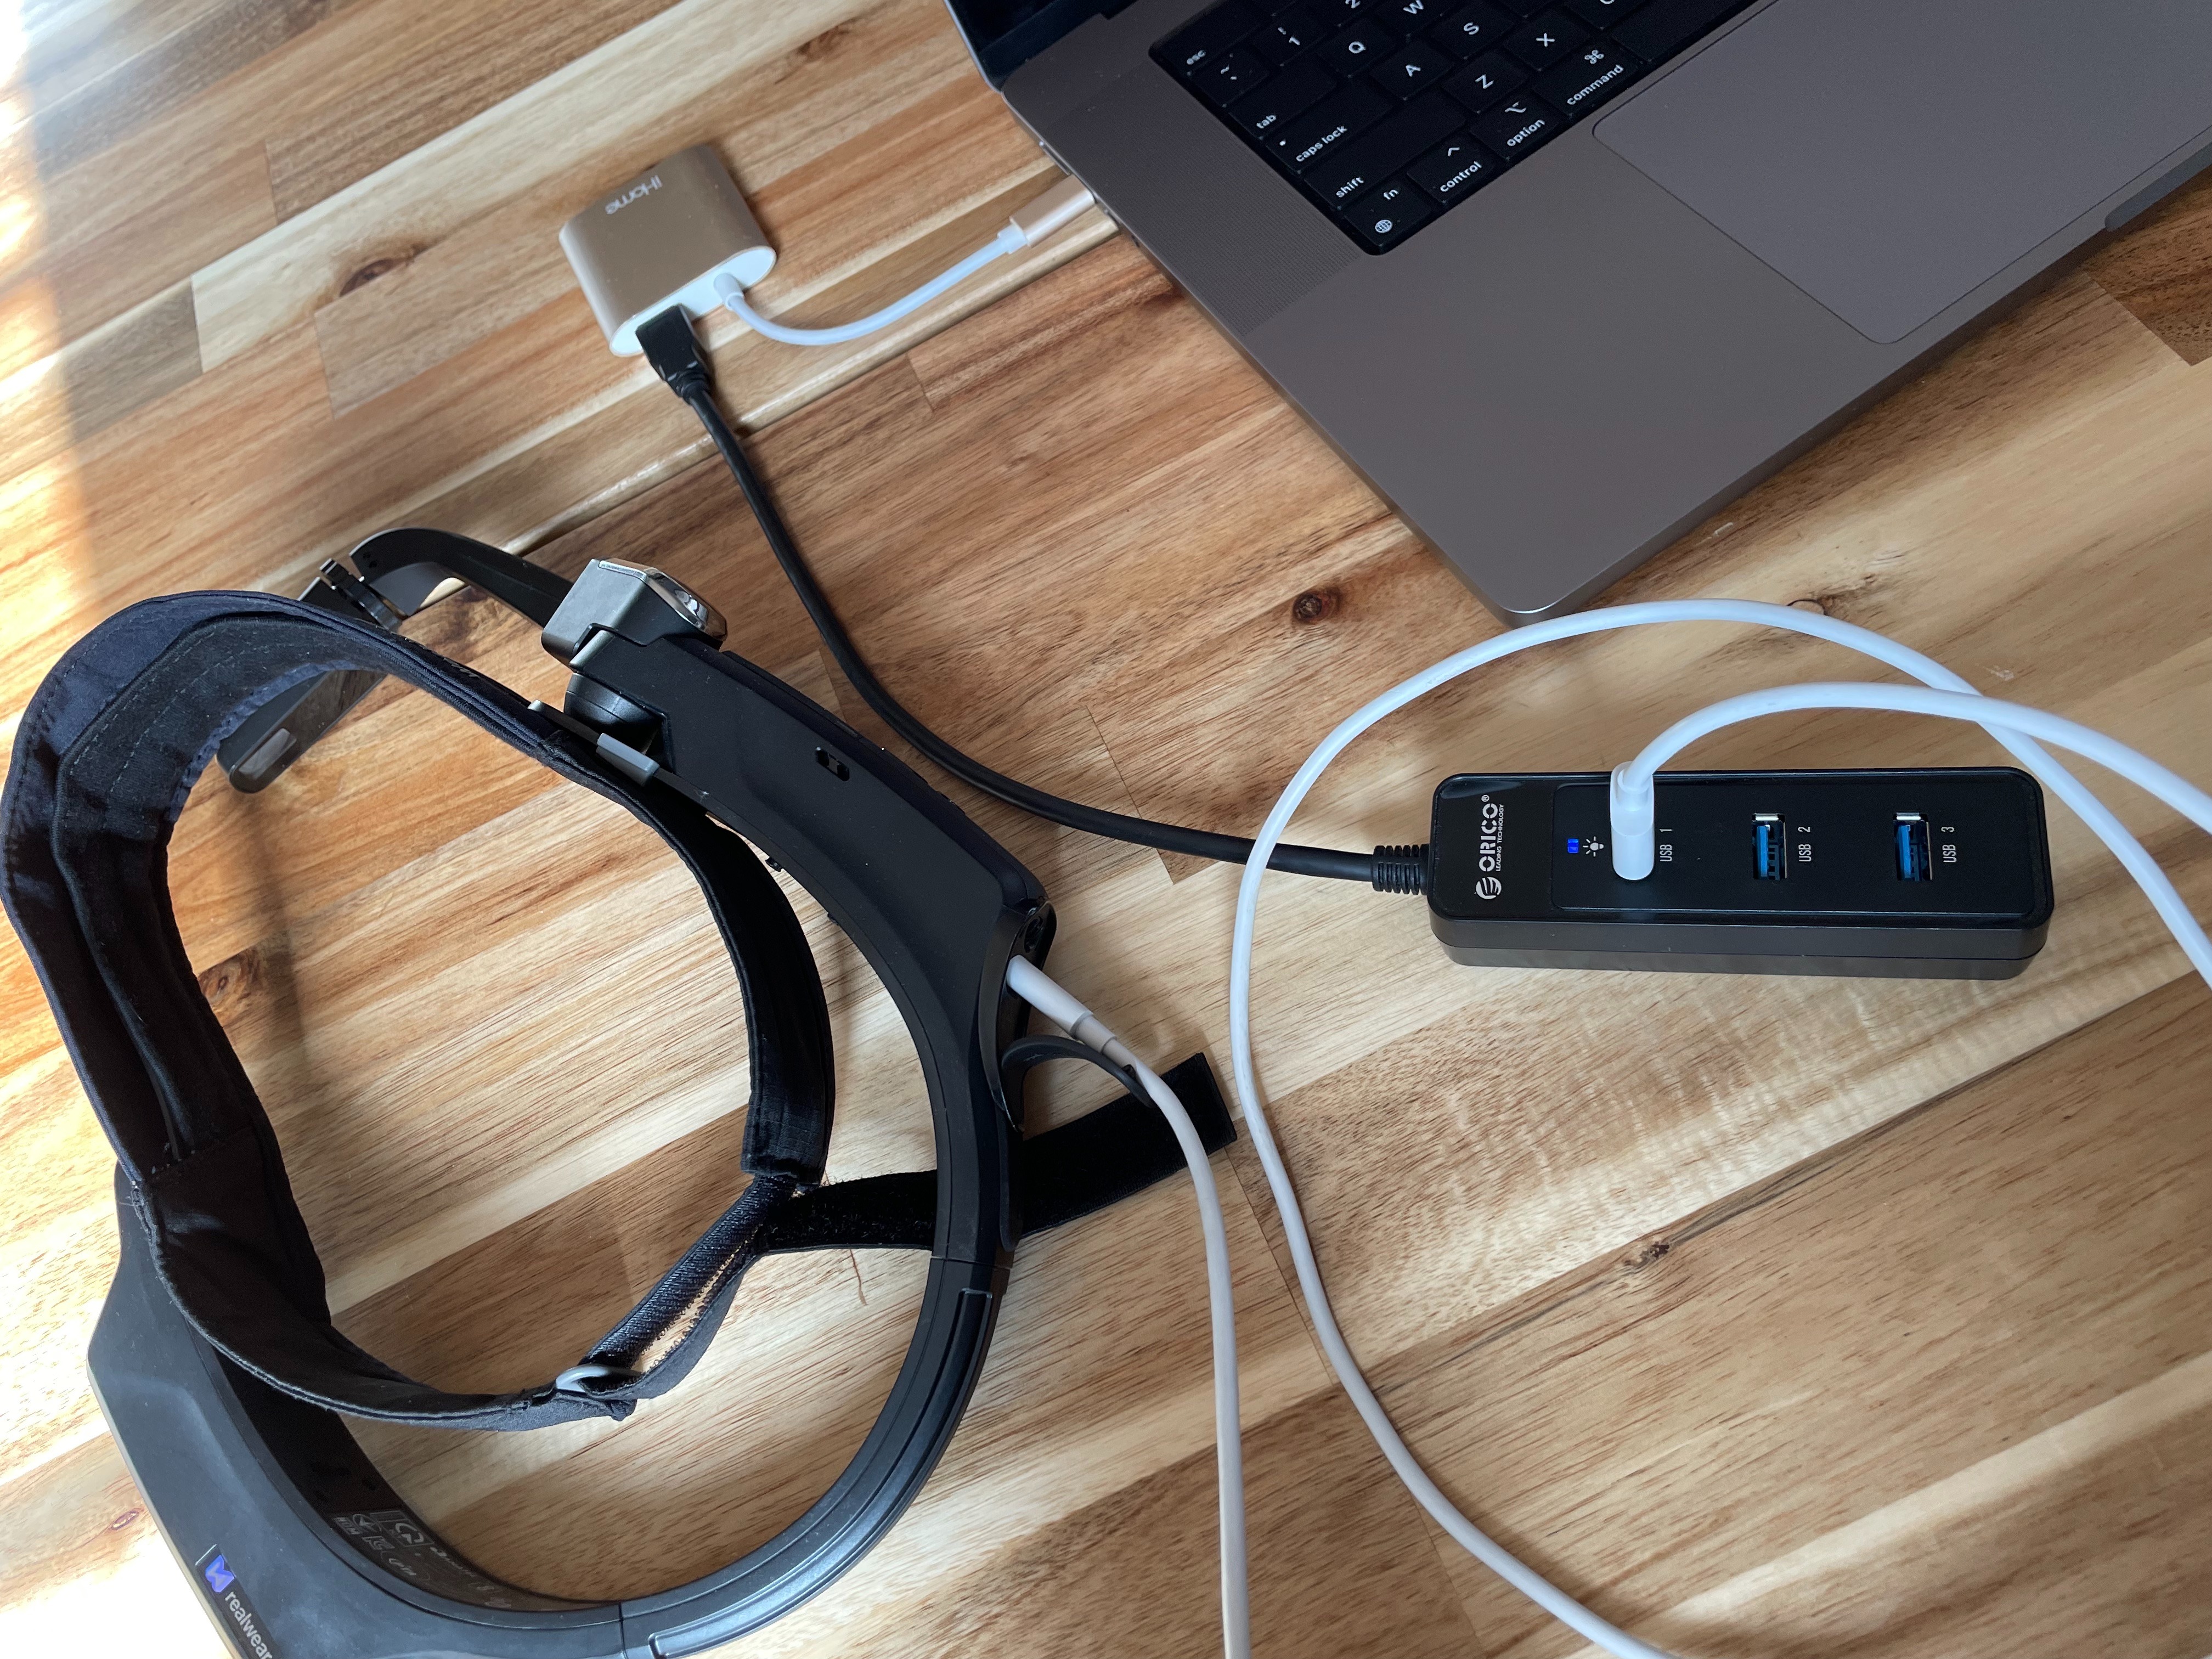 Connect the RealWear headset to your computer via USB